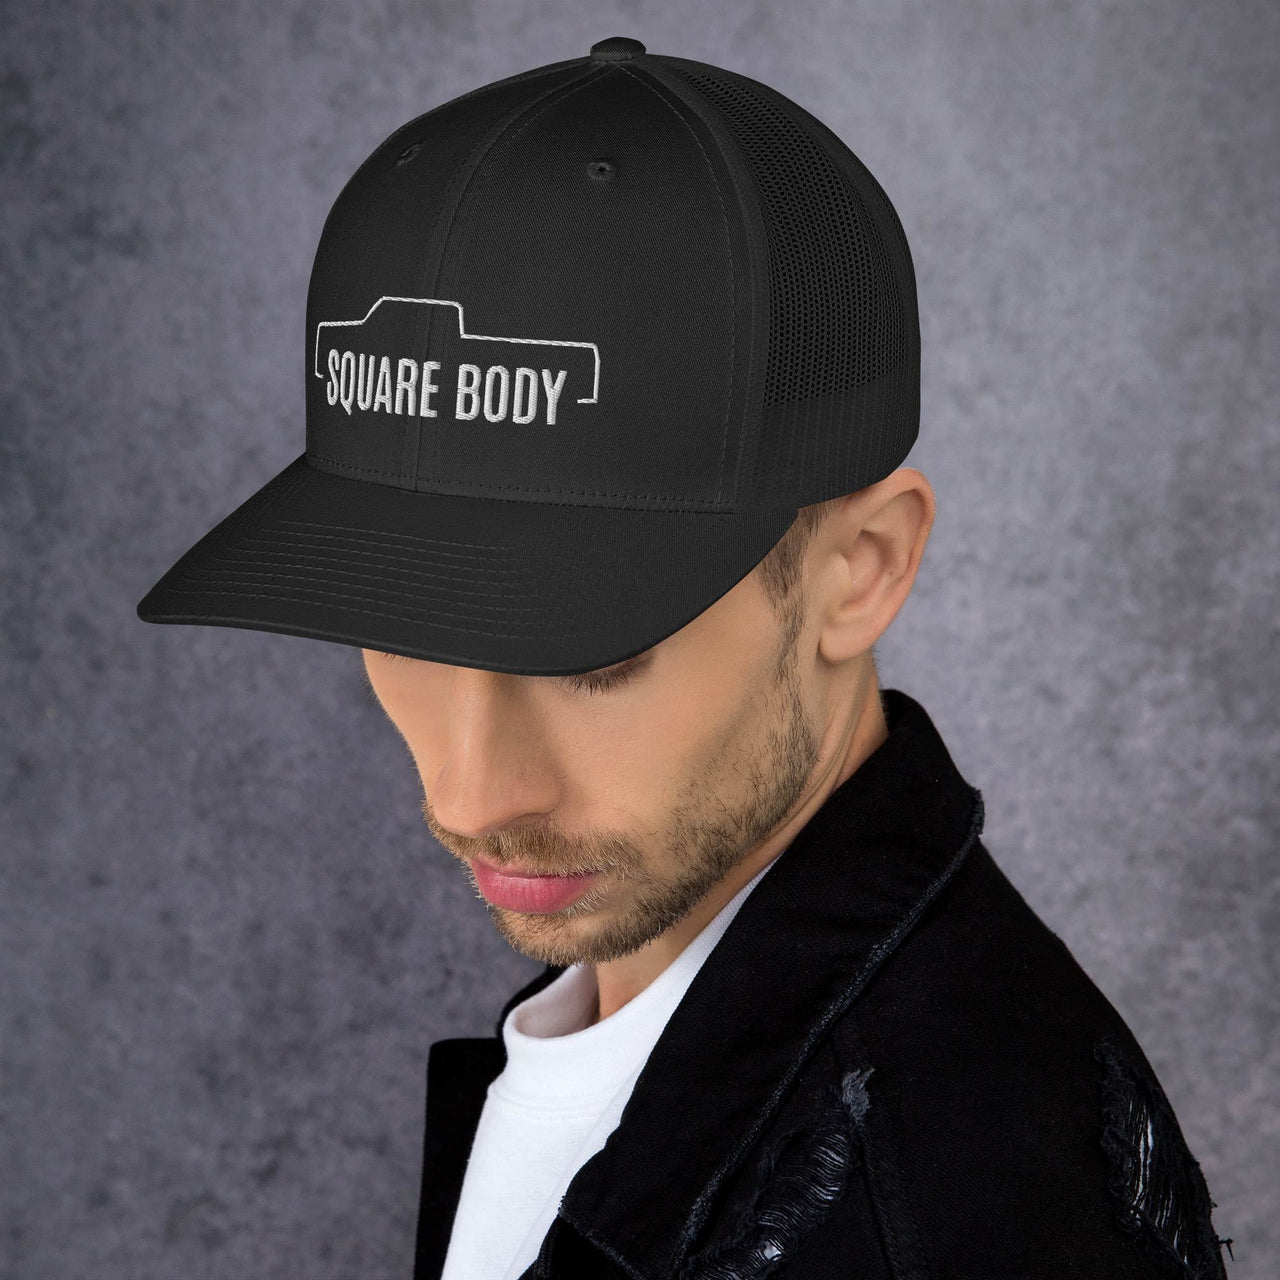 Man wearing a Crew Cab Square Body Trucker Hat From Aggressive Thread in black